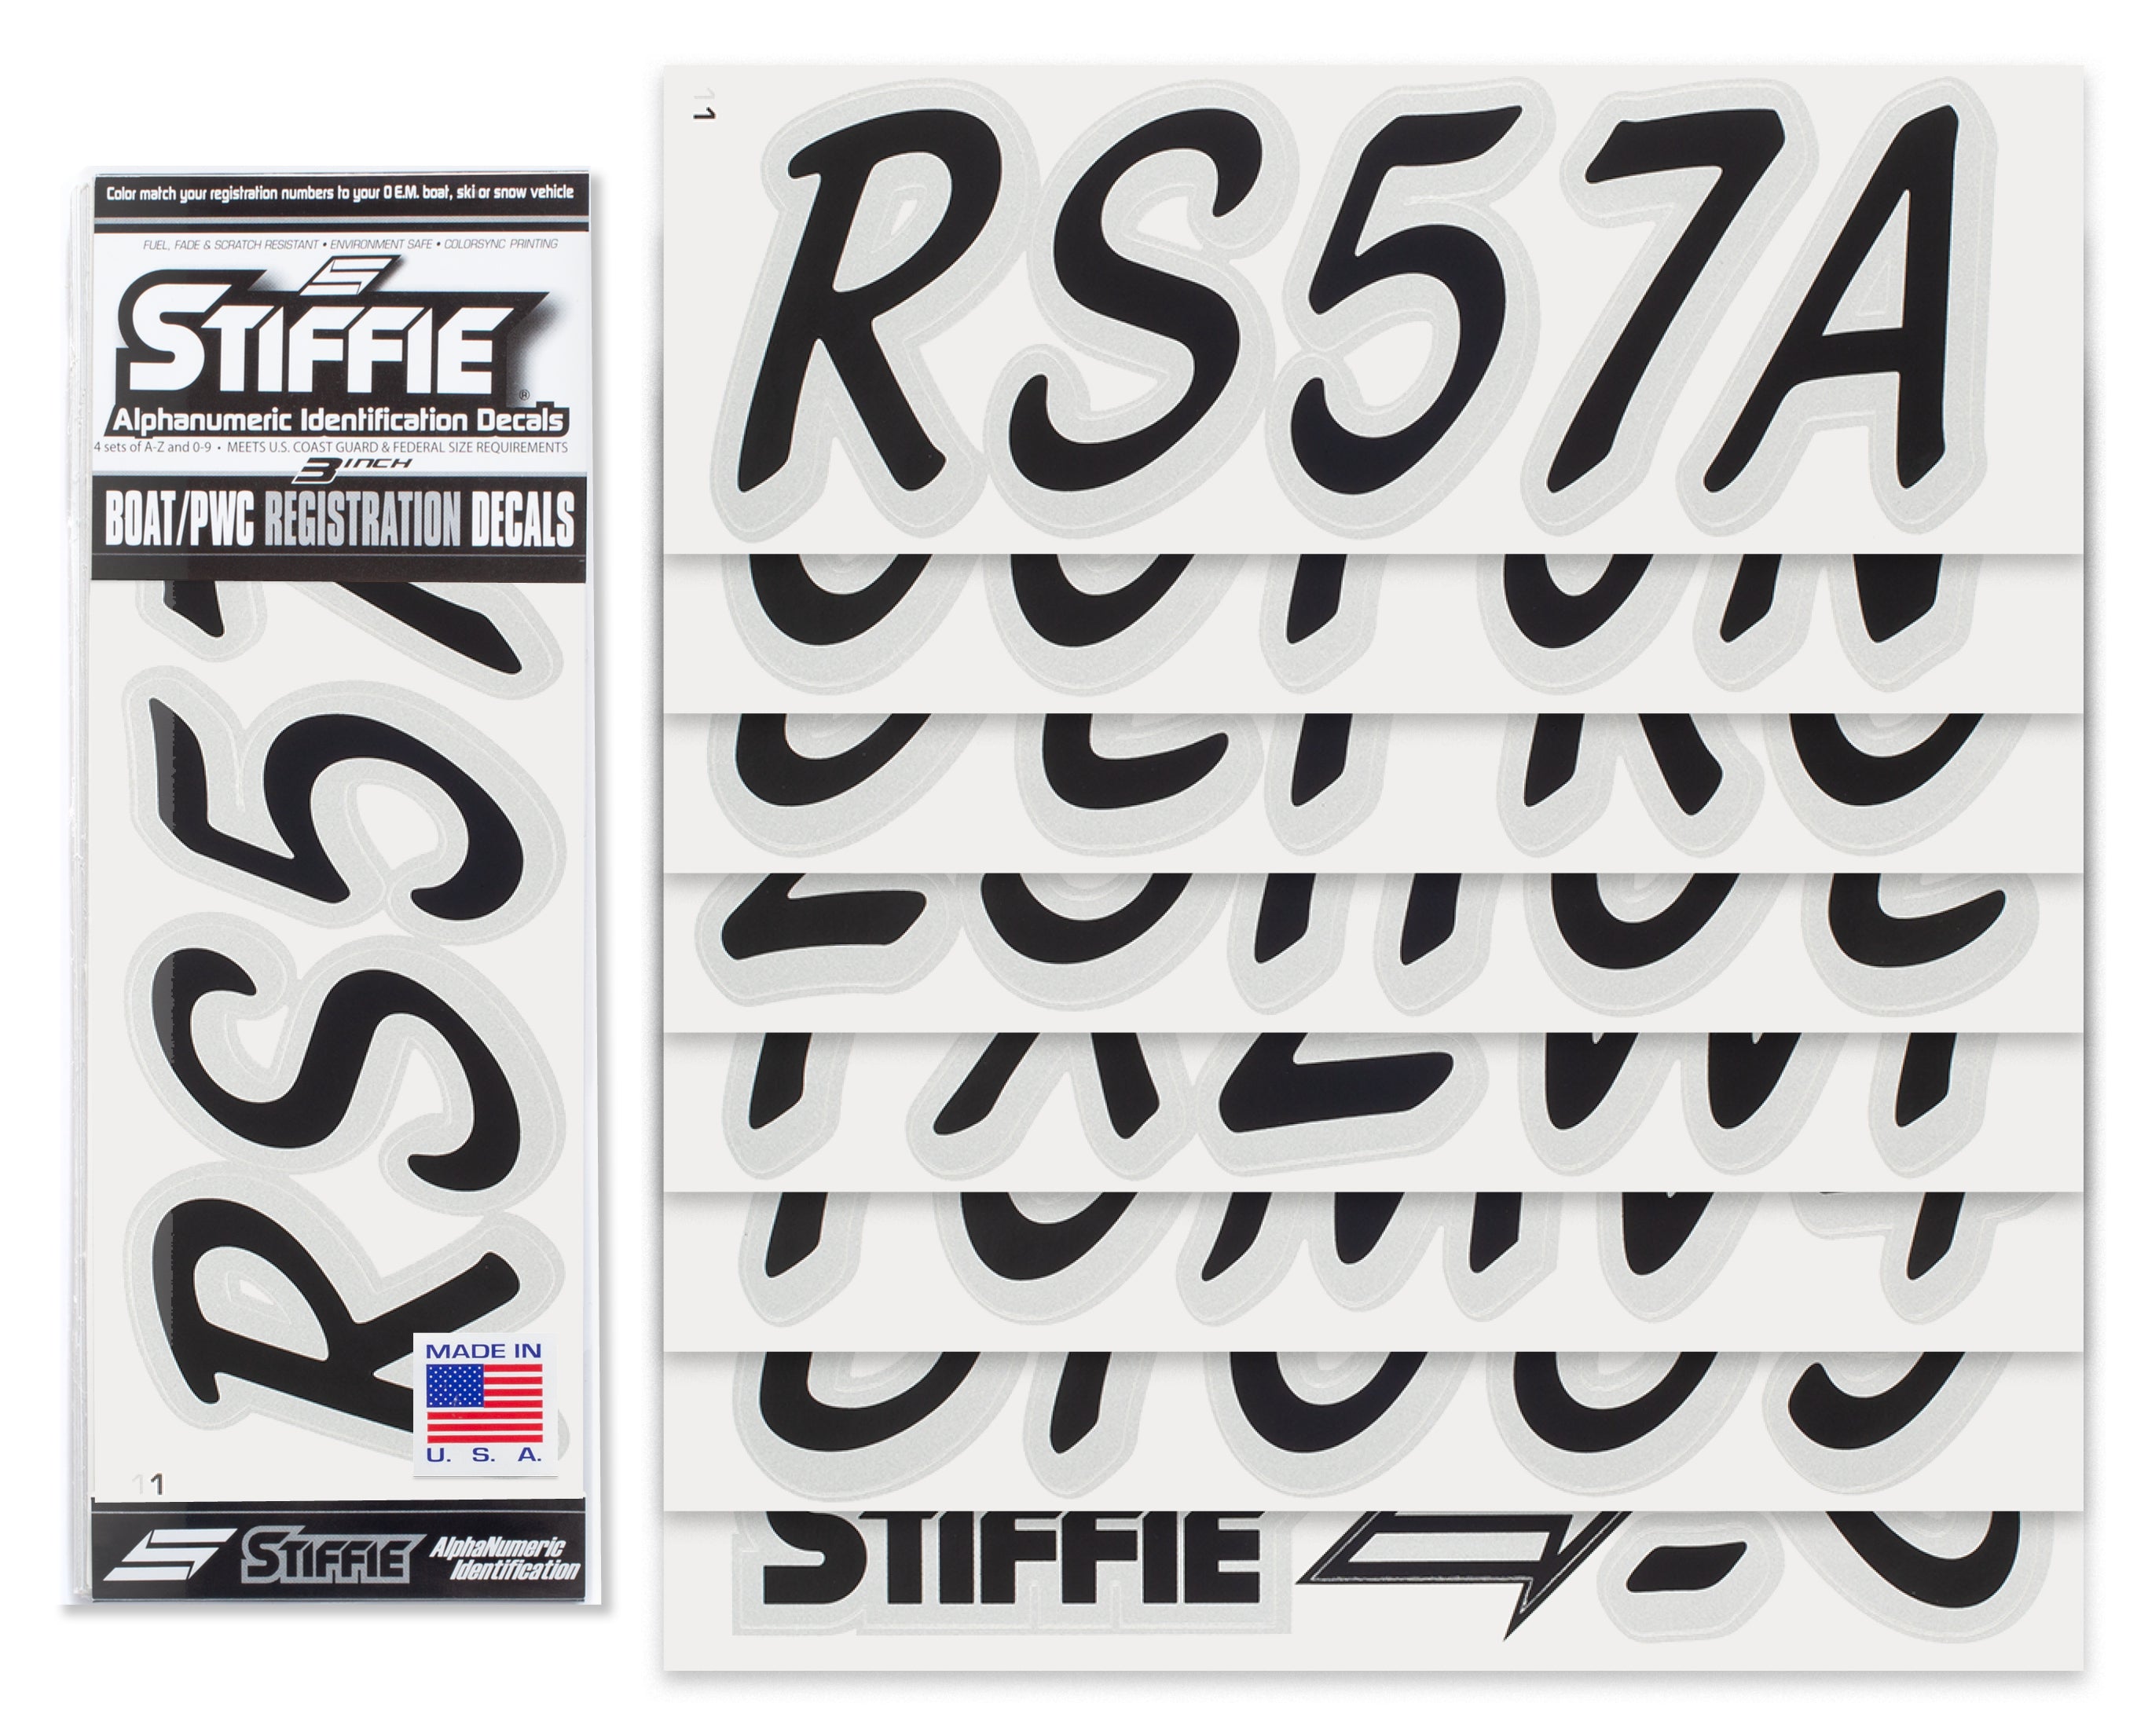 STIFFIE Whipline Solid Black/Metallic Silver 3" Alpha-Numeric Registration Identification Numbers Stickers Decals for Boats & Personal Watercraft